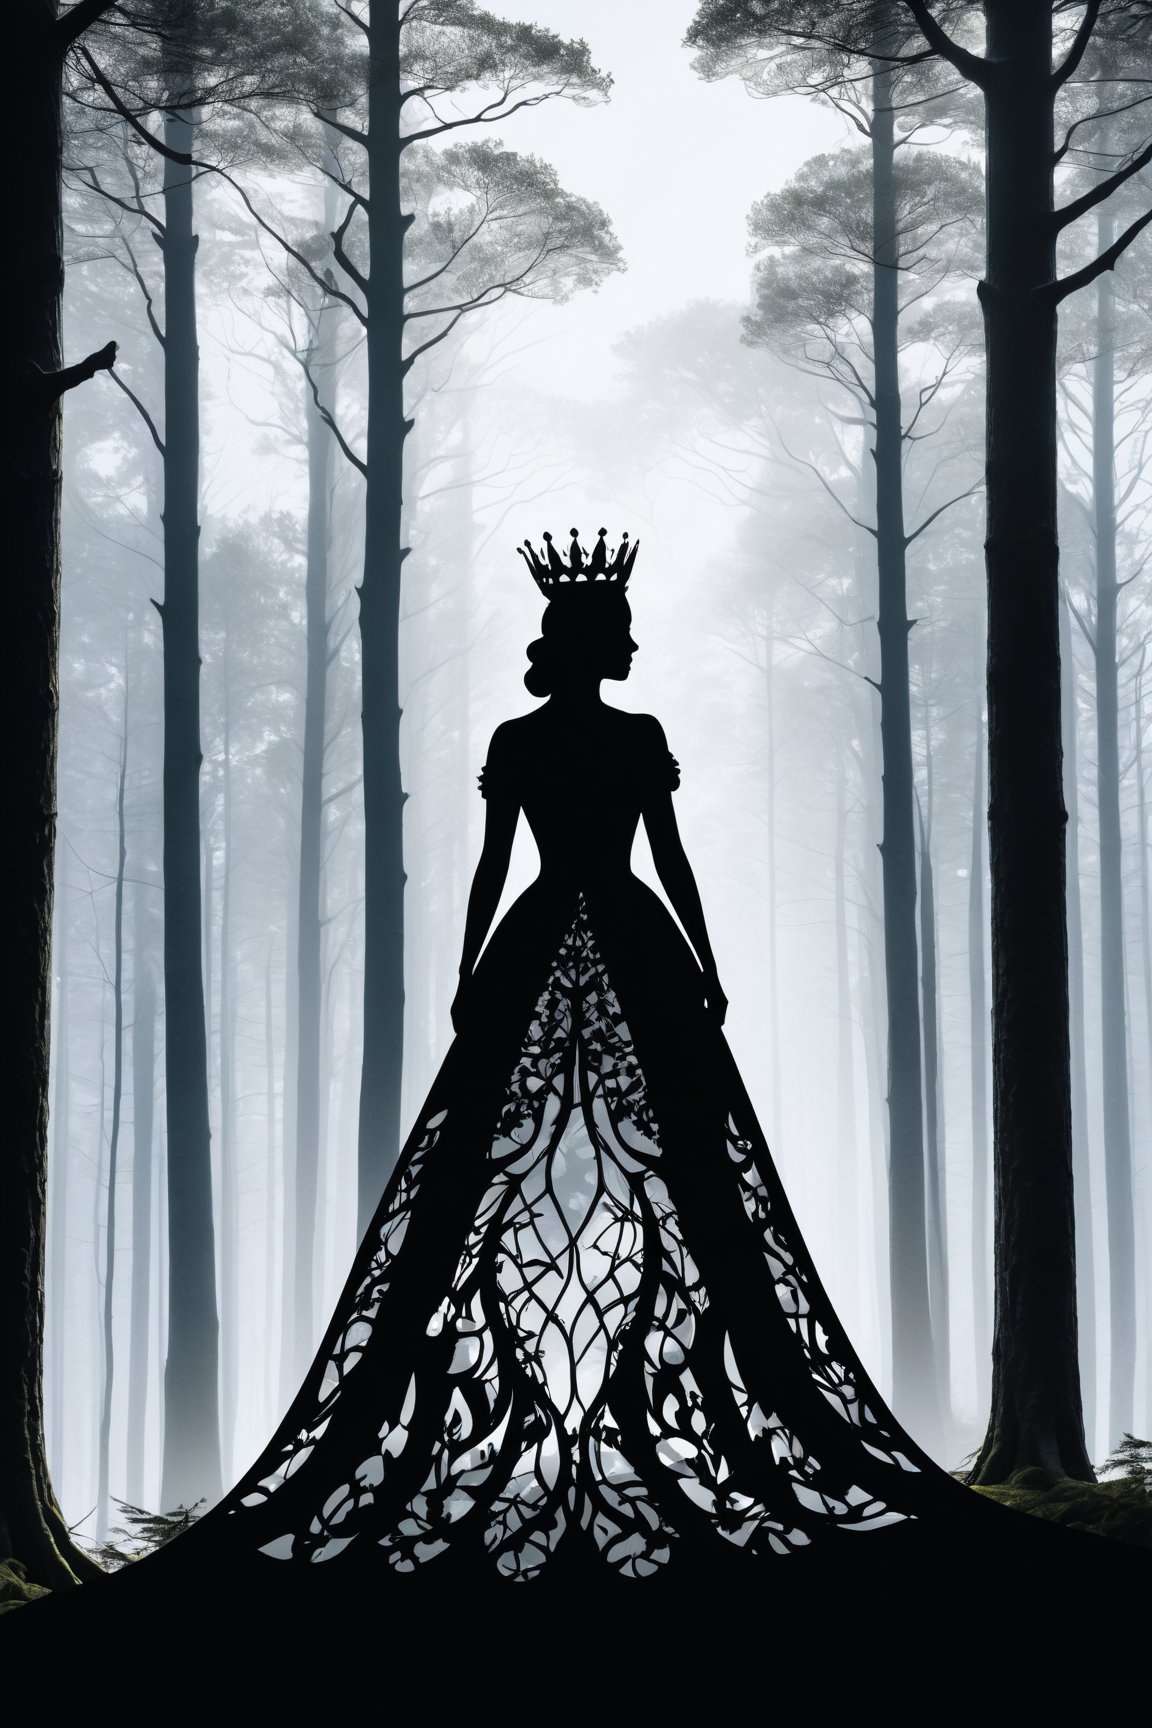 (best quality,8K,highres,masterpiece), ultra-detailed, presents a striking silhouette of a Nordic queen, her form ingeniously filled with the dense, intricate beauty of a forest through the art of double exposure. The image is rendered in sharp, crisp lines that define the queen's regal outline, while the monochrome background serves to highlight the complexity and depth of the forest within her. This blend of human elegance and natural wilderness captures a powerful symbol of unity between leadership and the environment. The queen's silhouette, outlined against a stark, monochrome backdrop, evokes a sense of timeless strength and the enduring connection between nature and sovereignty.